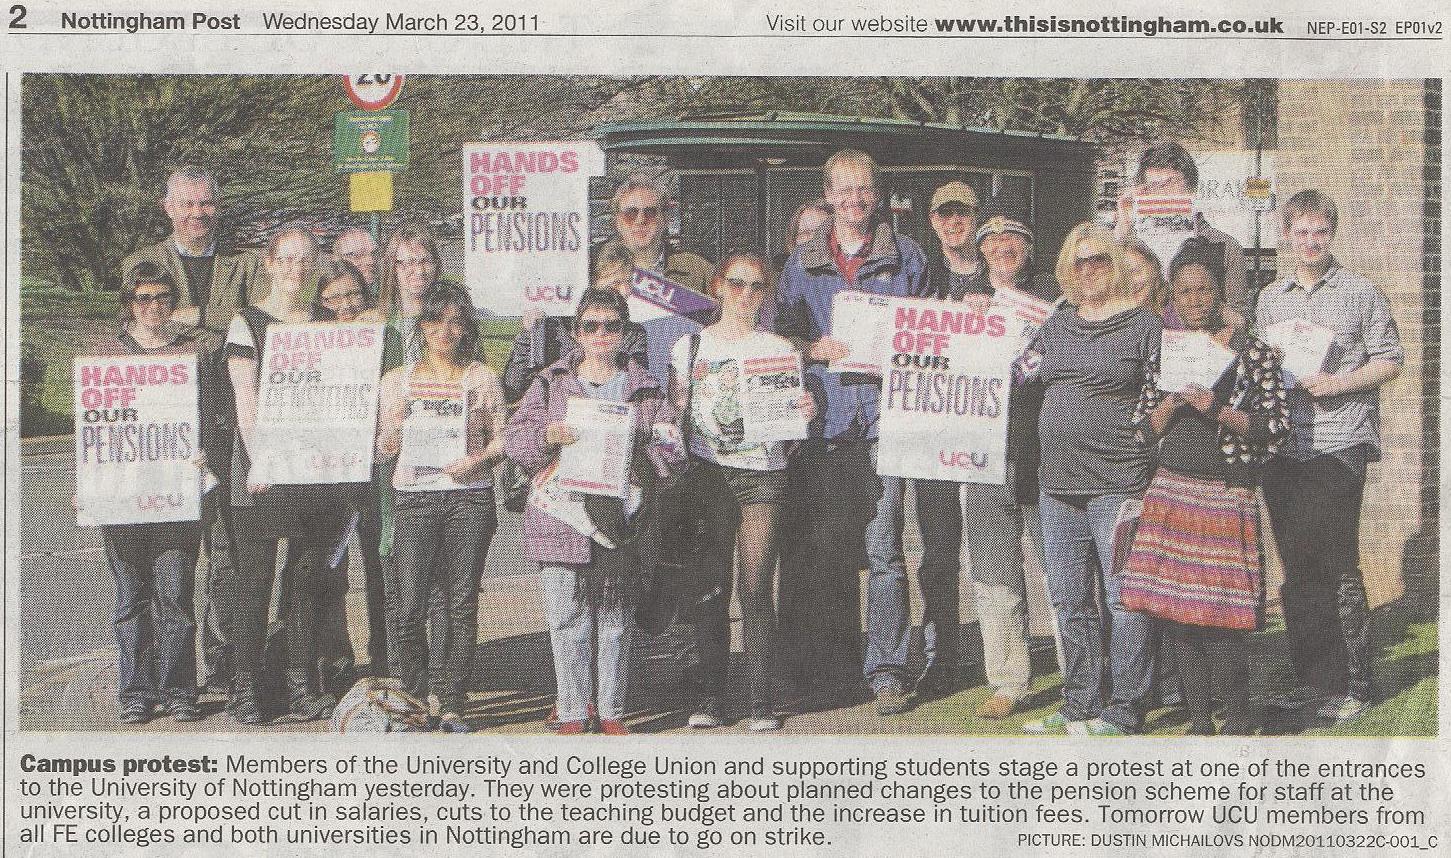 Press cutting with photograph in evening post of one UCU picket line taken on 22nd March